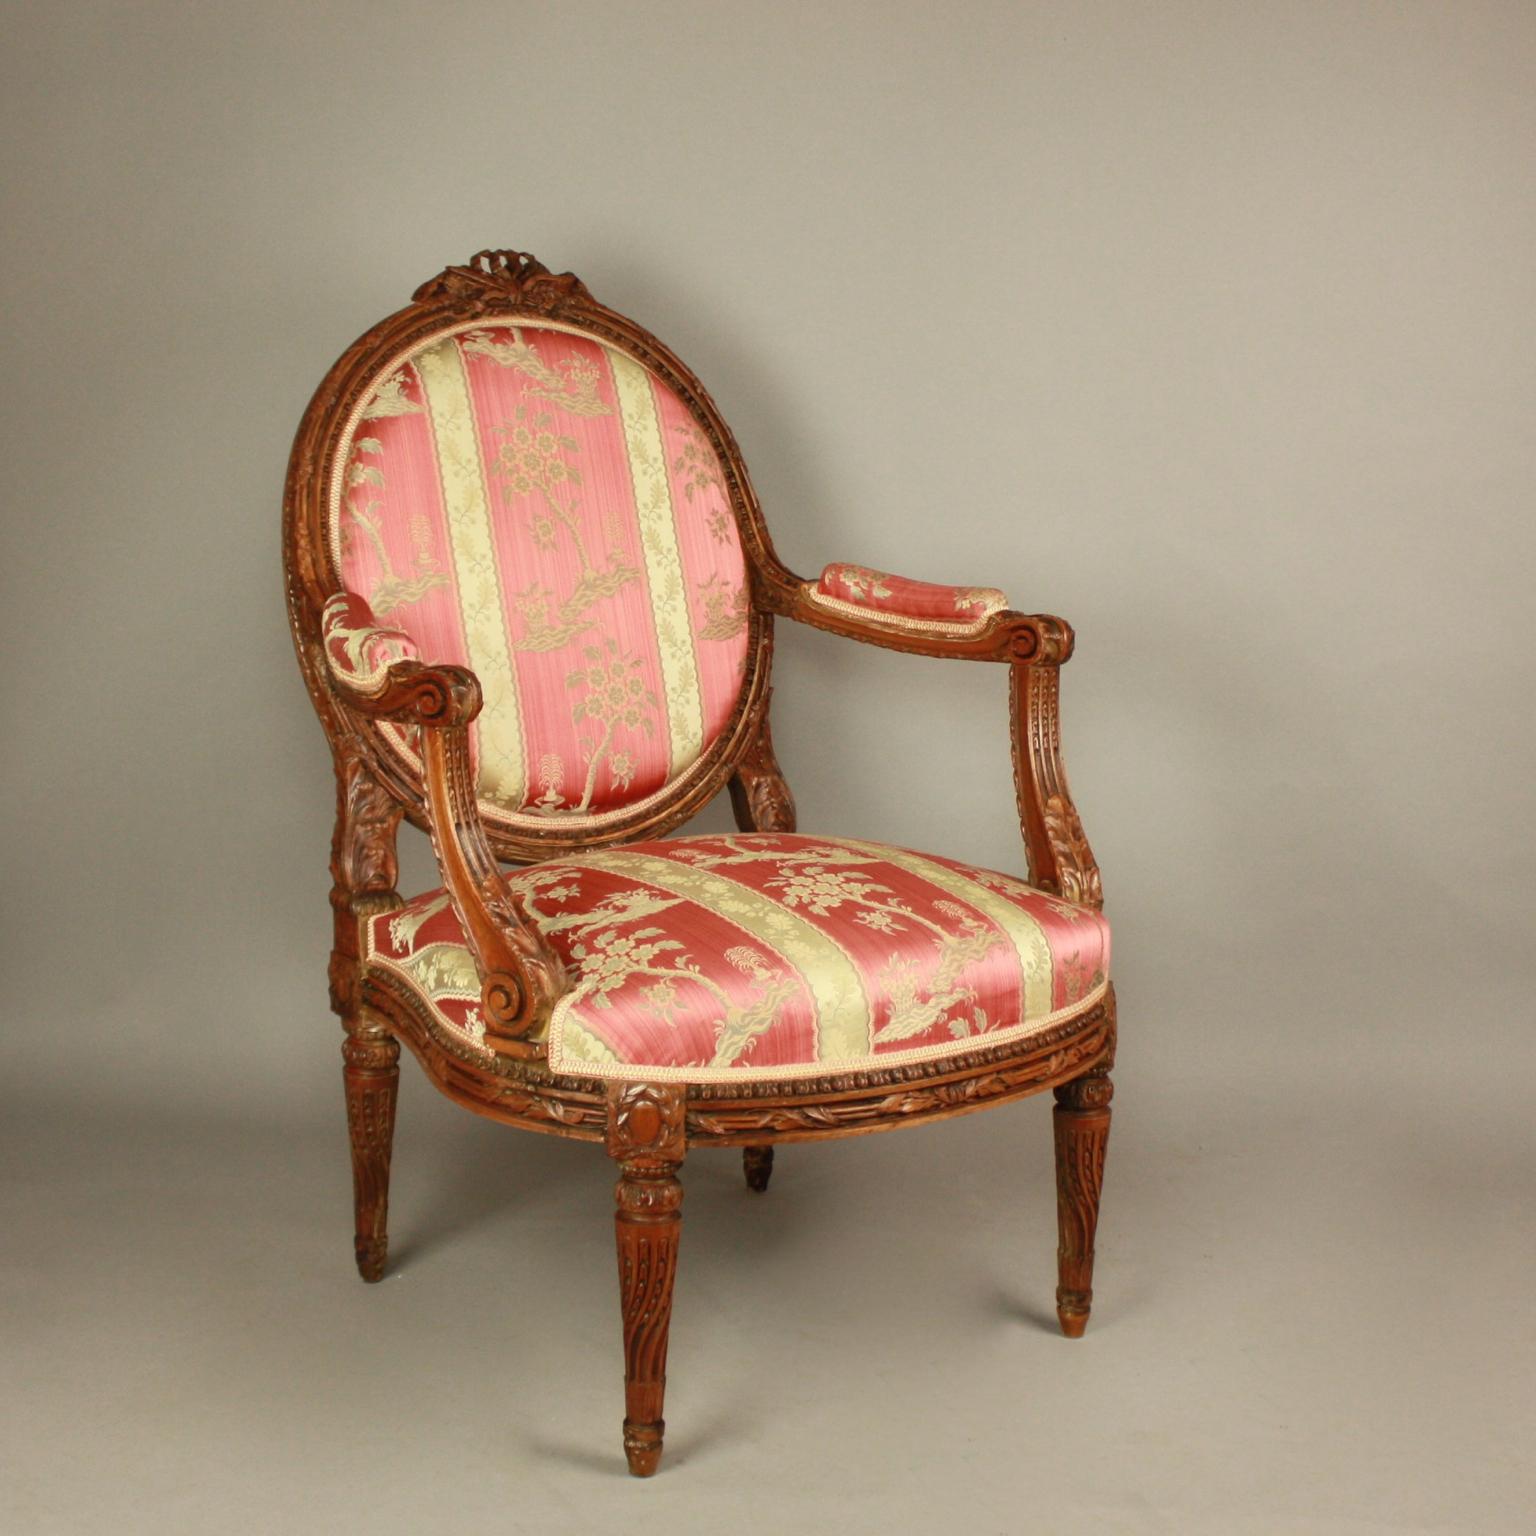 French Pair of 19th Ct. Louis XVI Style Walnut Fauteuils or Armchairs after J.-R. Nadal